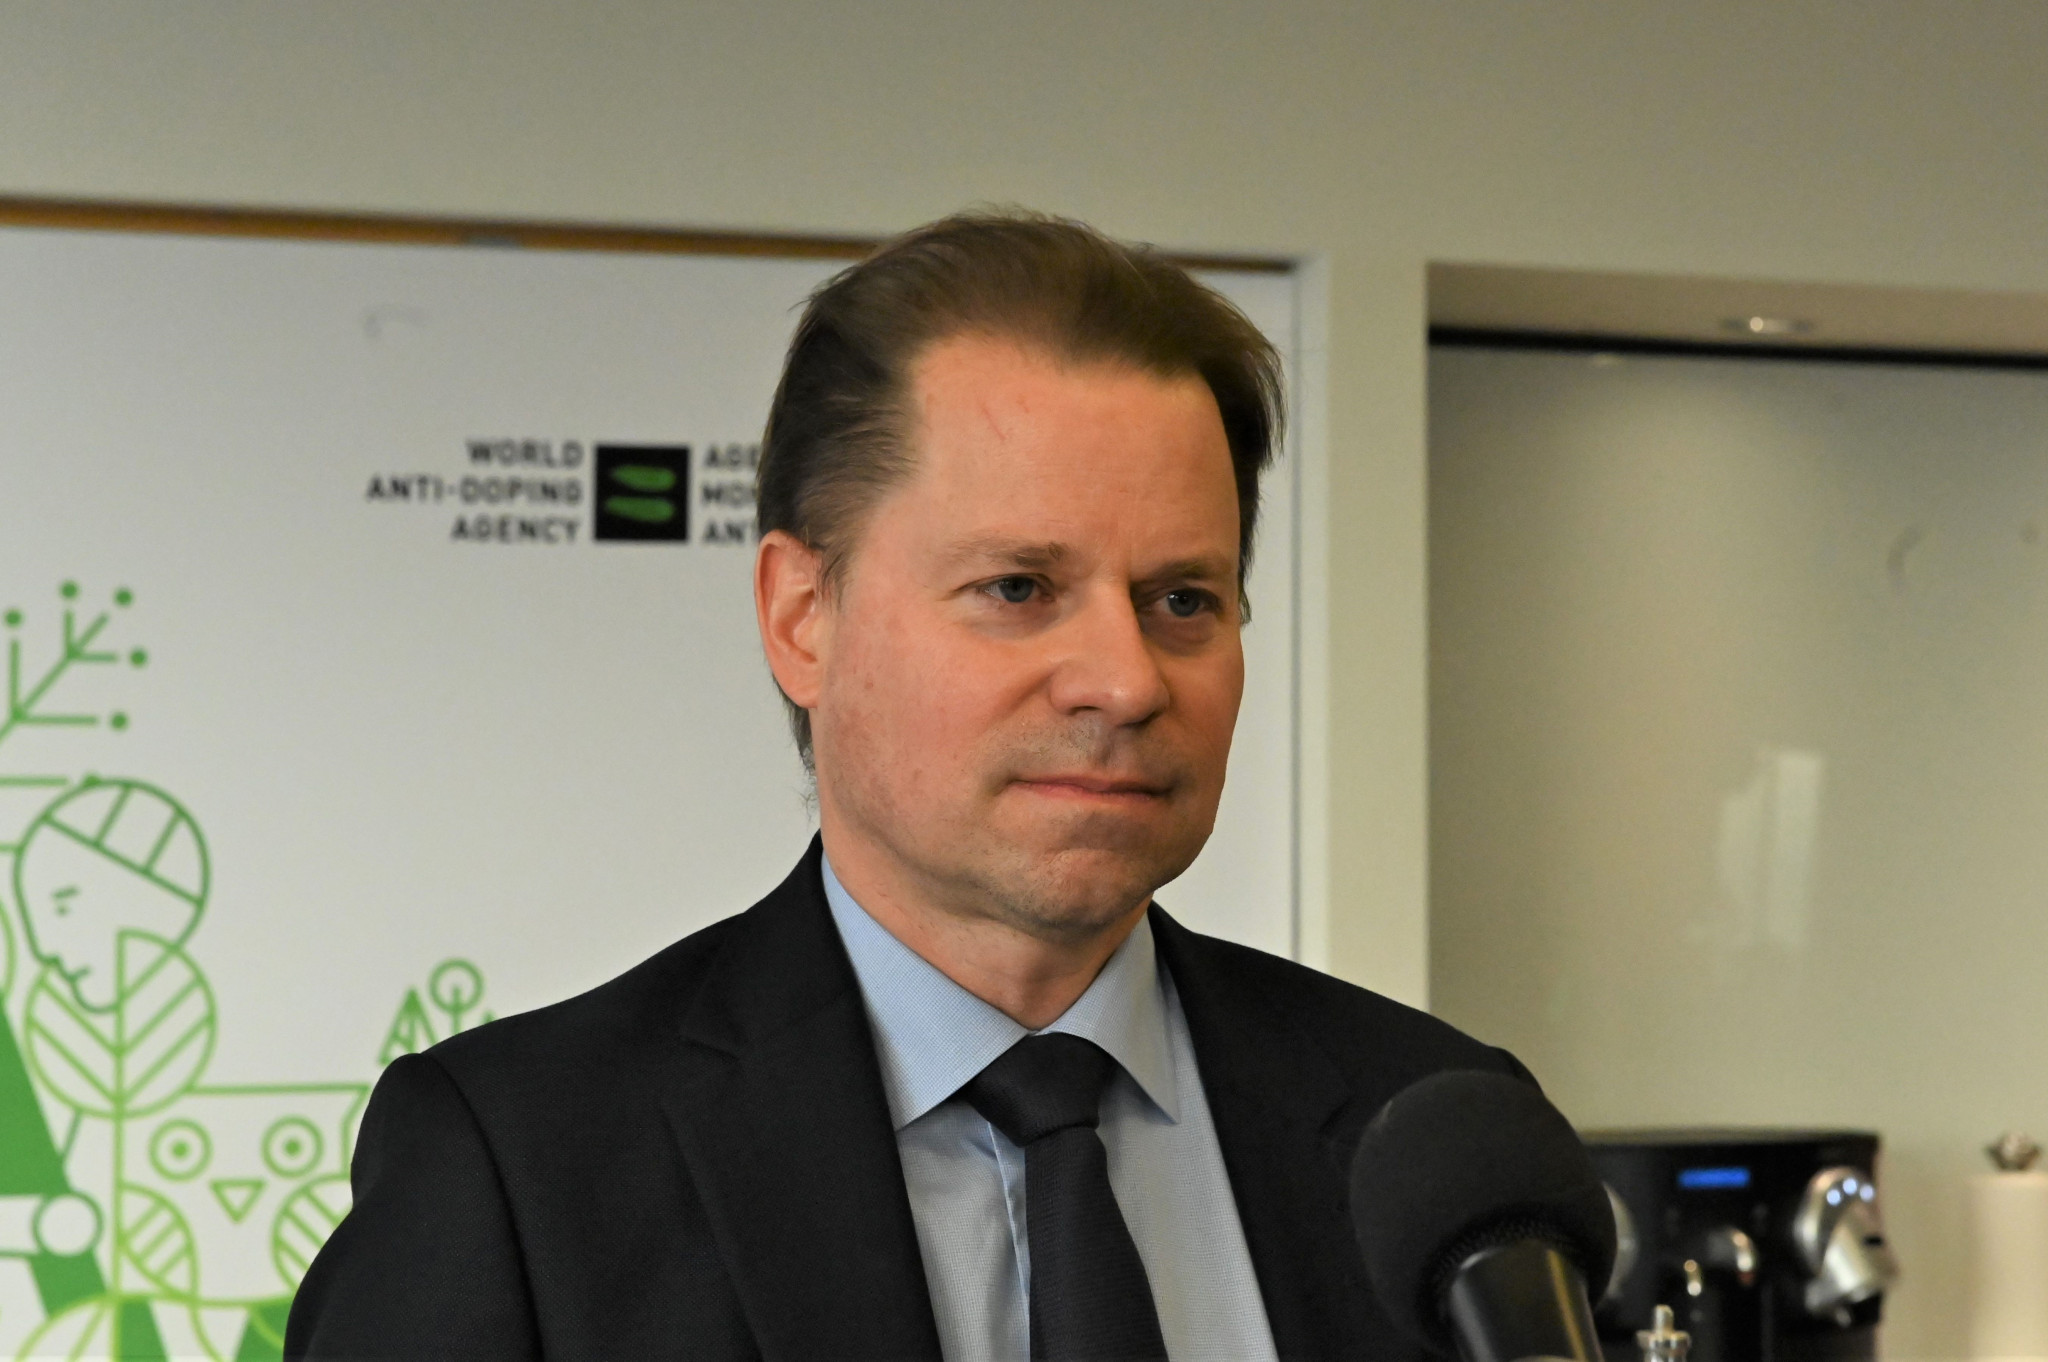 WADA director general Olivier Niggli said he was determined to ensure athletes benefit from the 